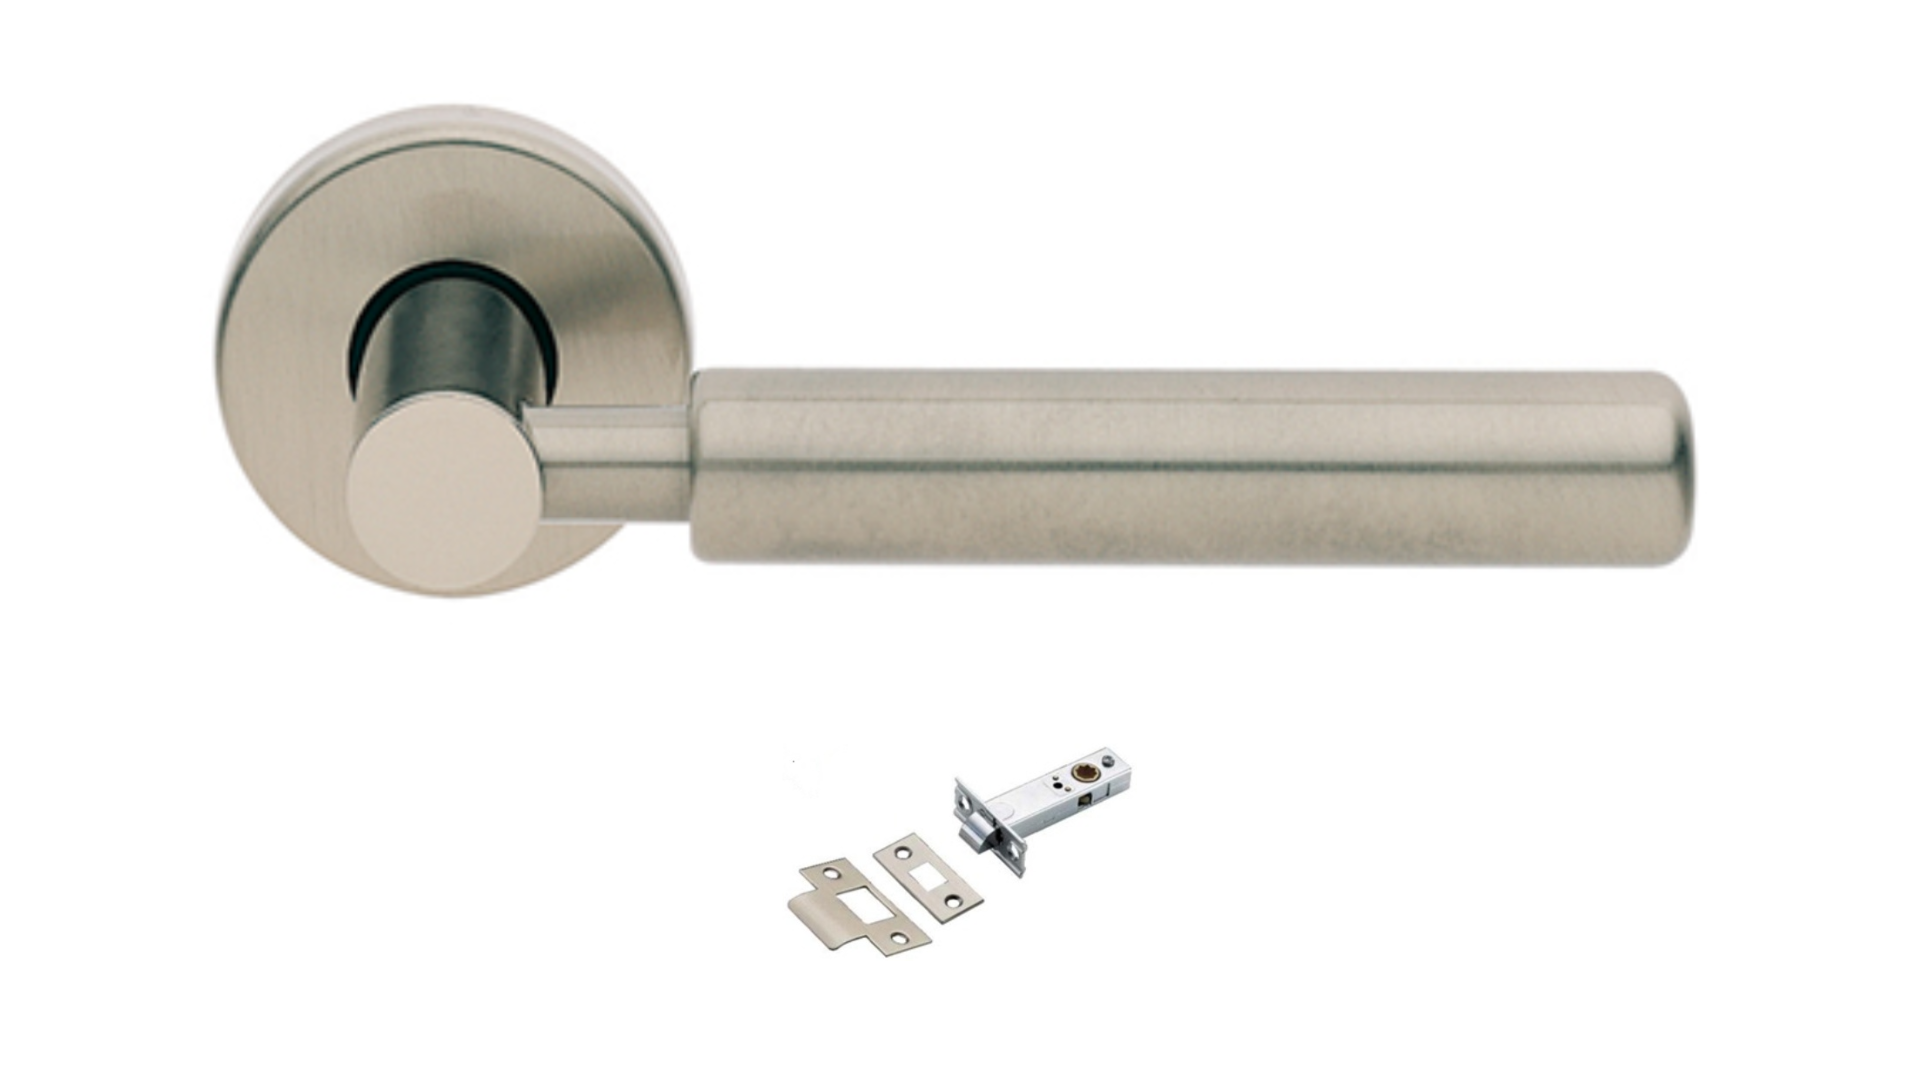 Product picture of the Amletto Satin Nickel Door Handle with separate privacy tubular latch on a white background.